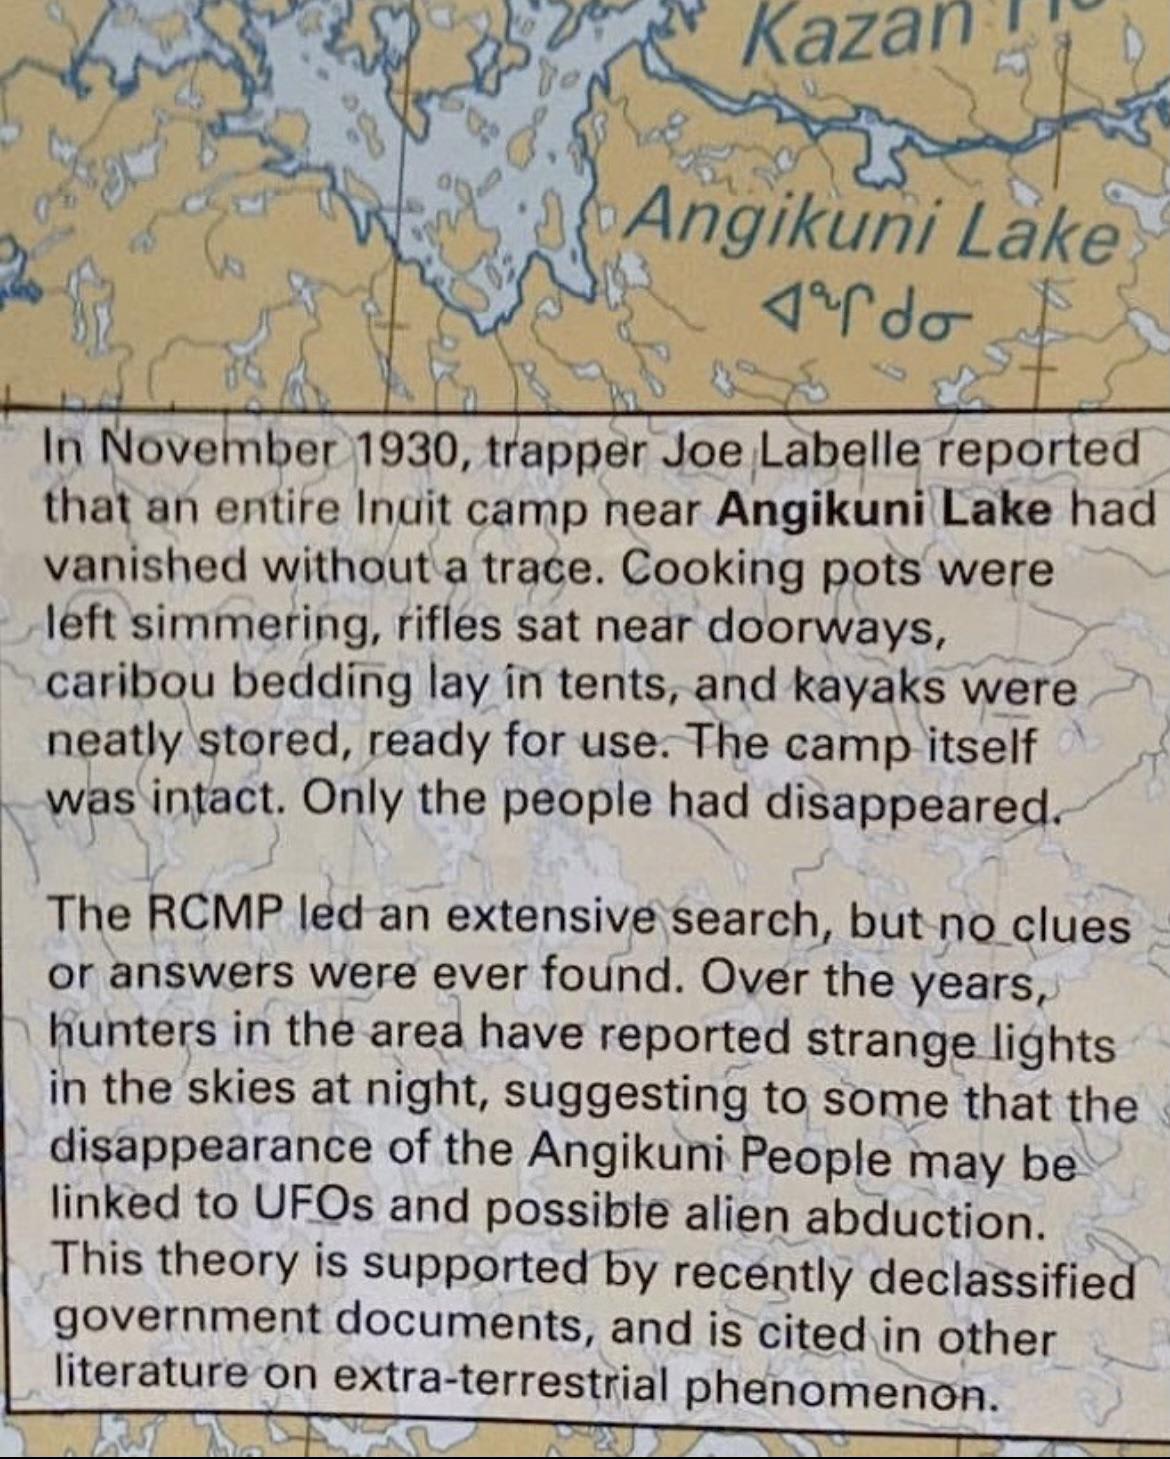 Angikuni Lake Incident - anyone heard about this? Wondering if it’s legit or been debunked.. fascinating.